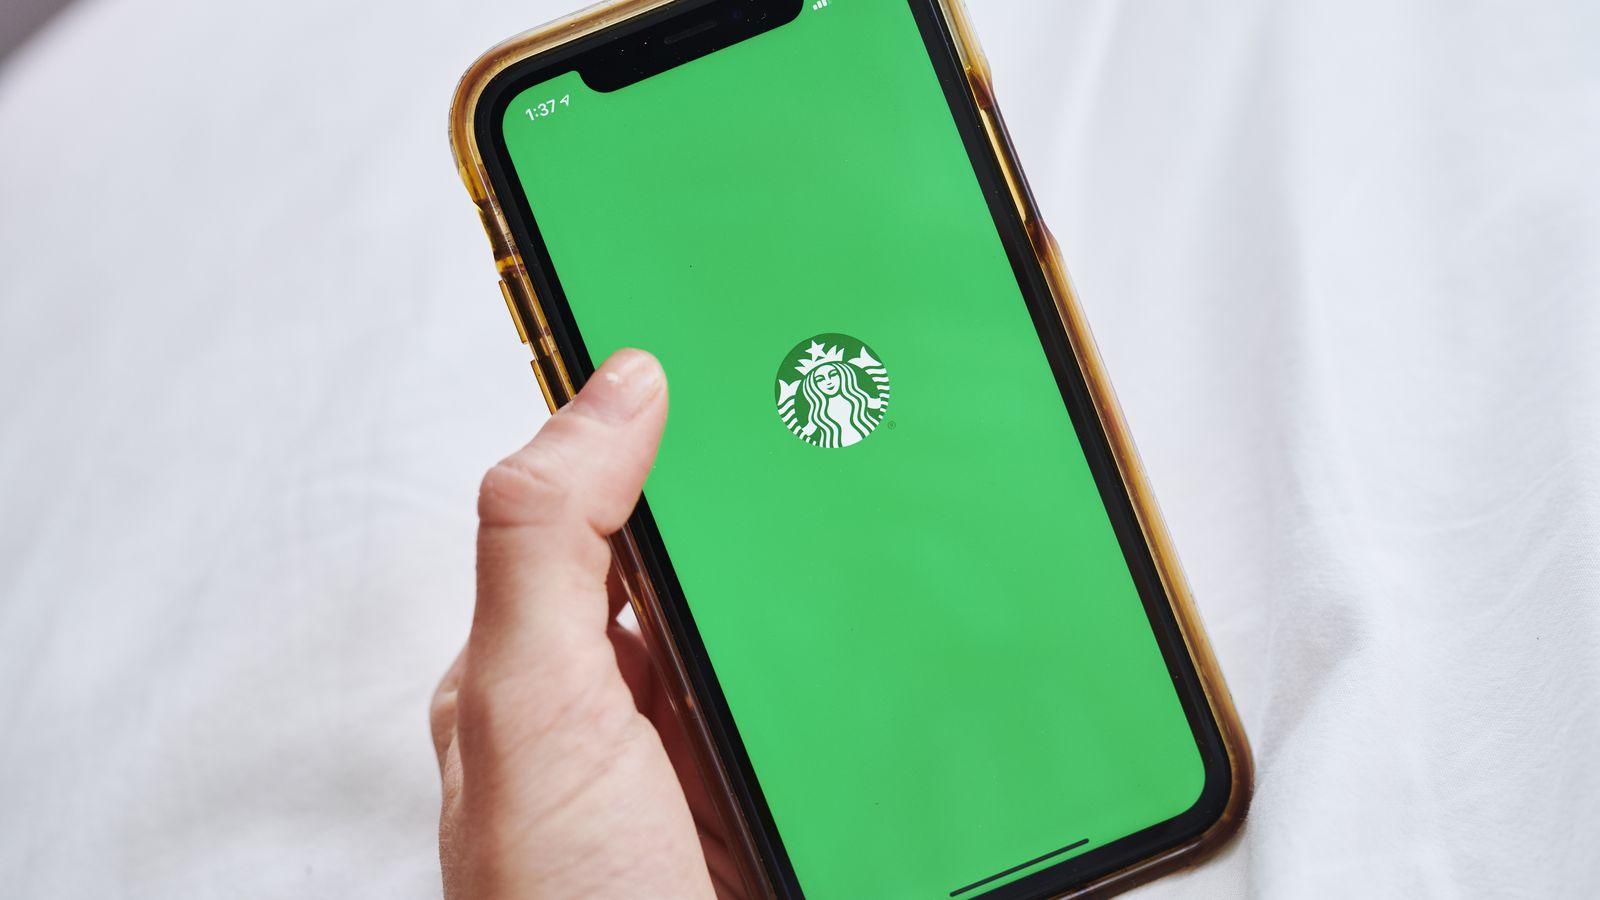 Starbucks Rewards changes coming in February 2023